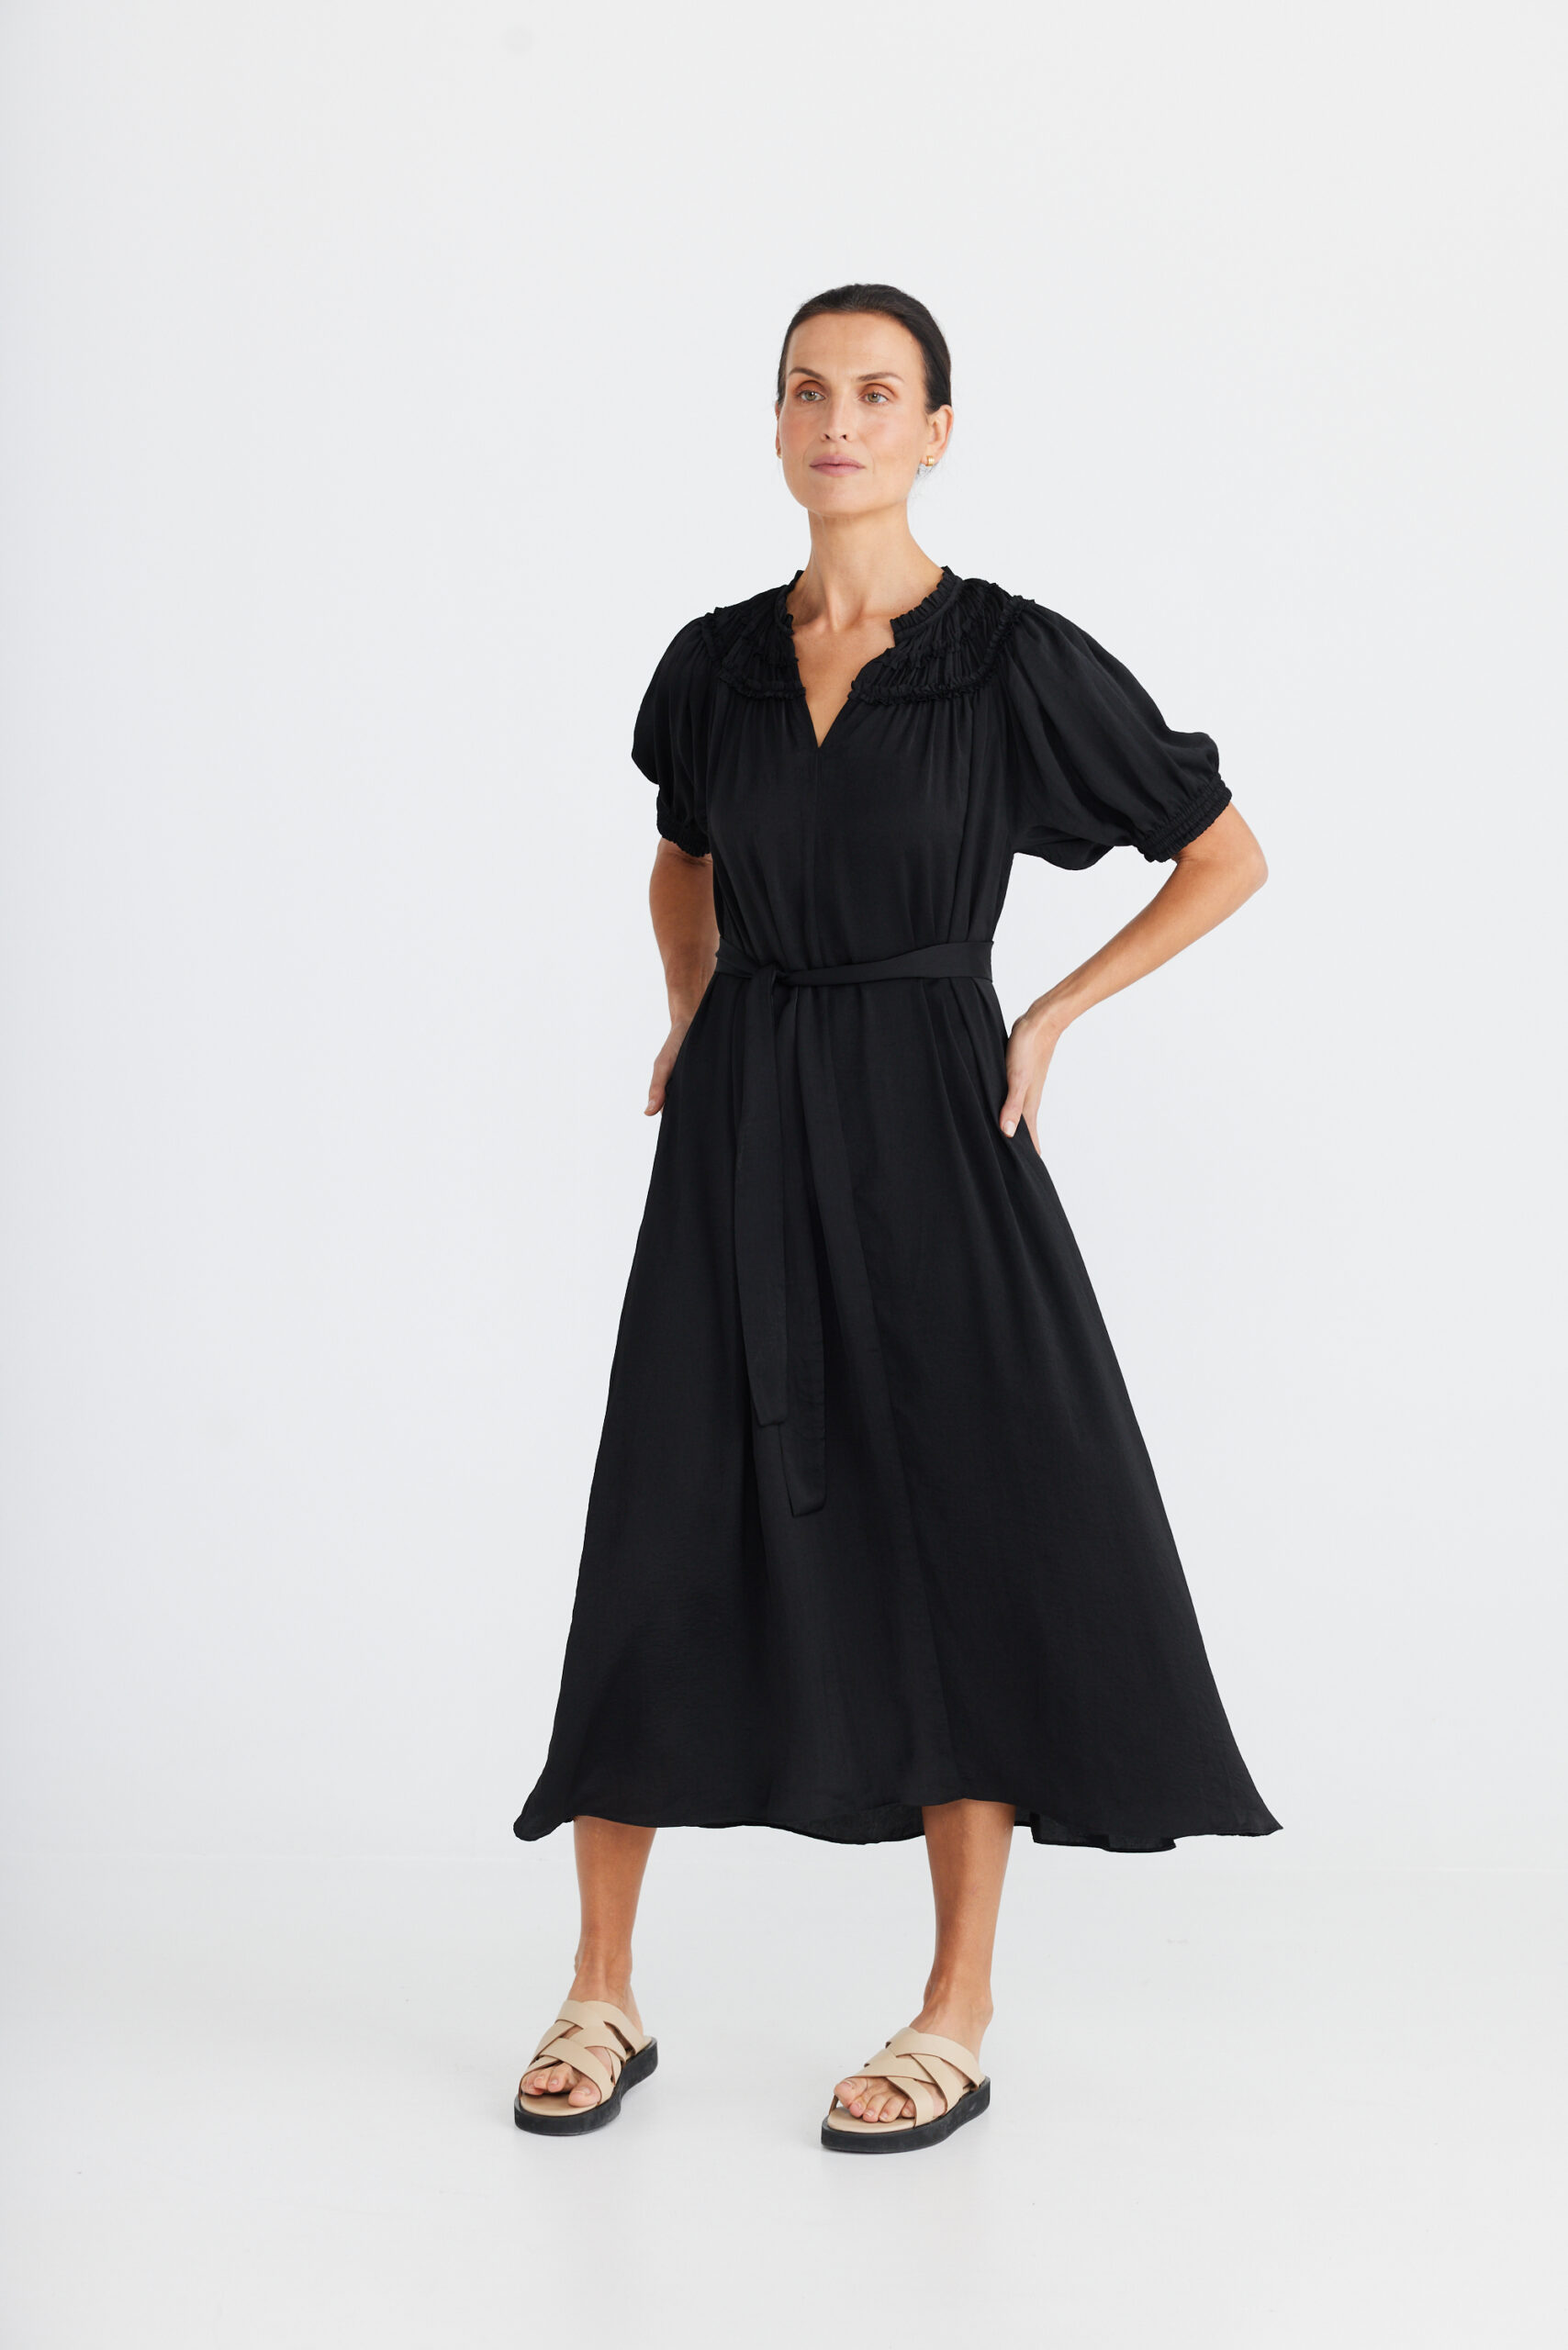 Mid length black dress with frill detail neckline